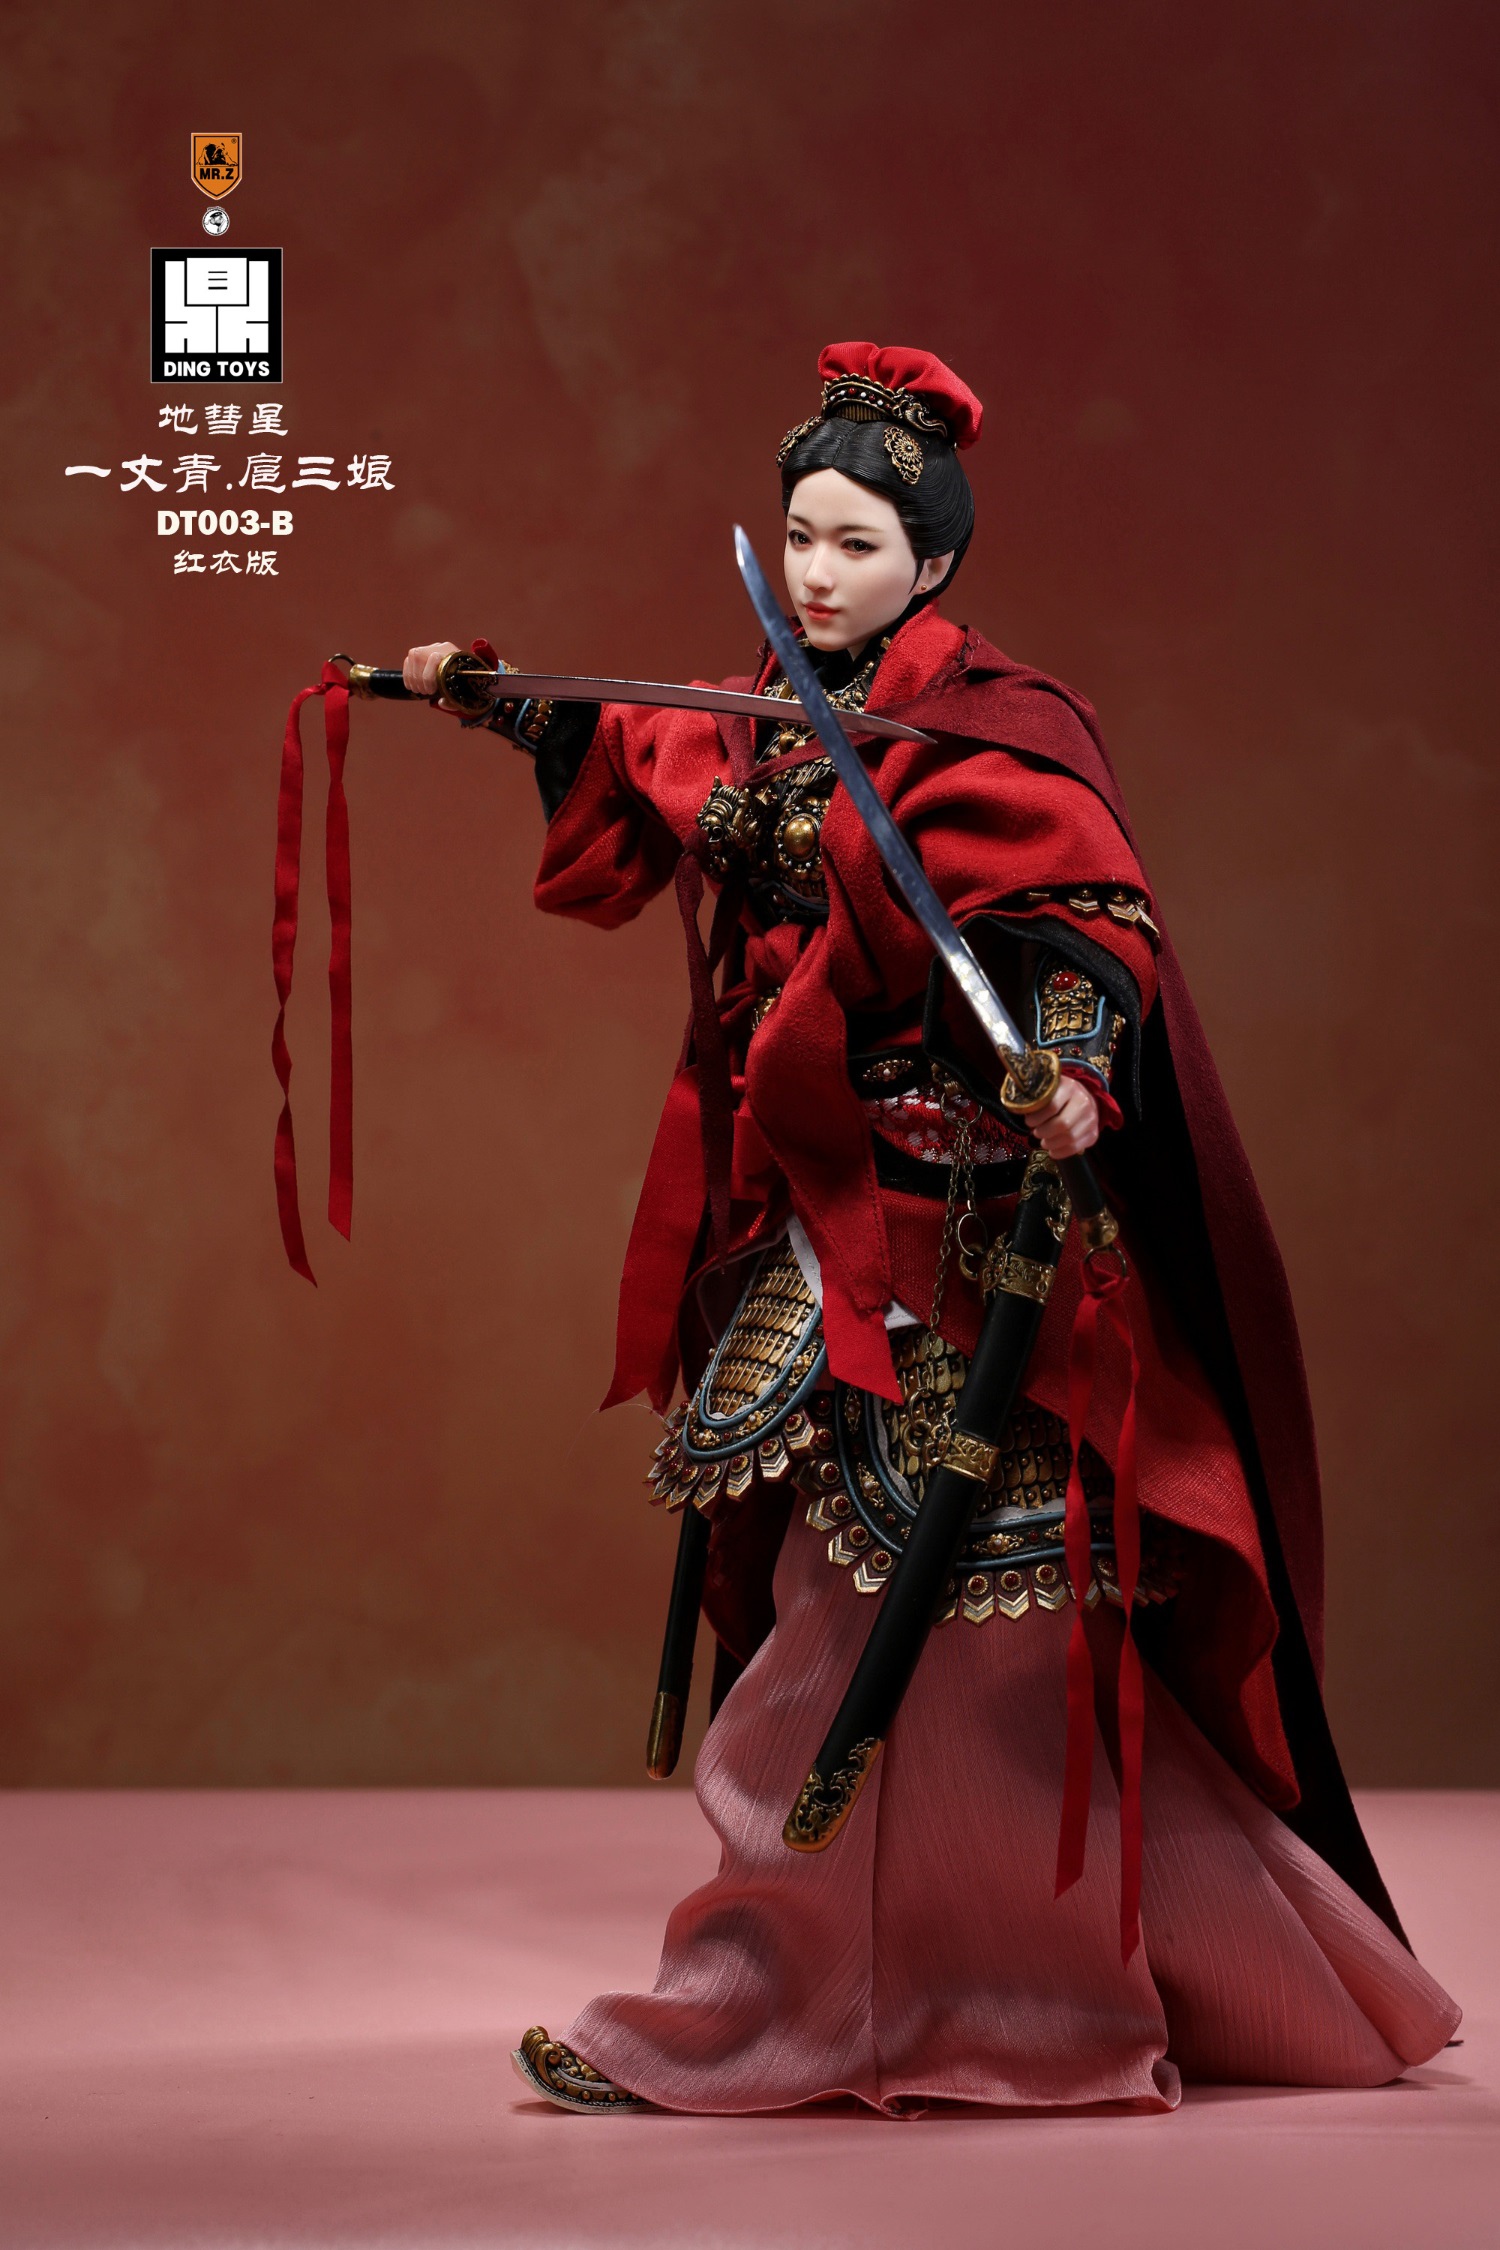 NEW PRODUCT: Mr.Z x Ding Toys DT003 1/6 Scale 《Water Margin》Shiying Zhang (Green and Red versions), Horse (White) 2746